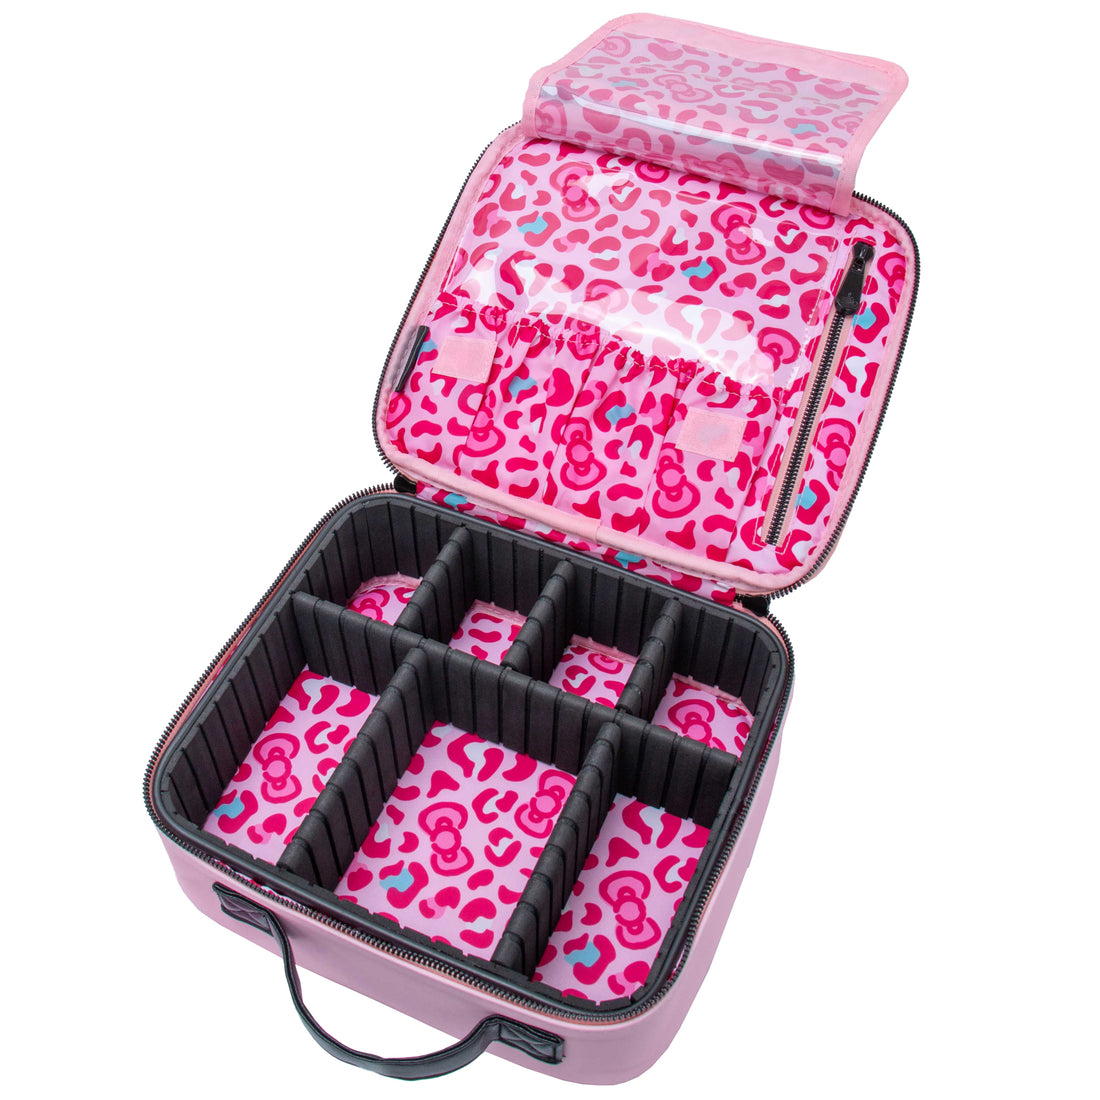 Impressions Vanity Hello Kitty Makeup Case with Full Size Mirror